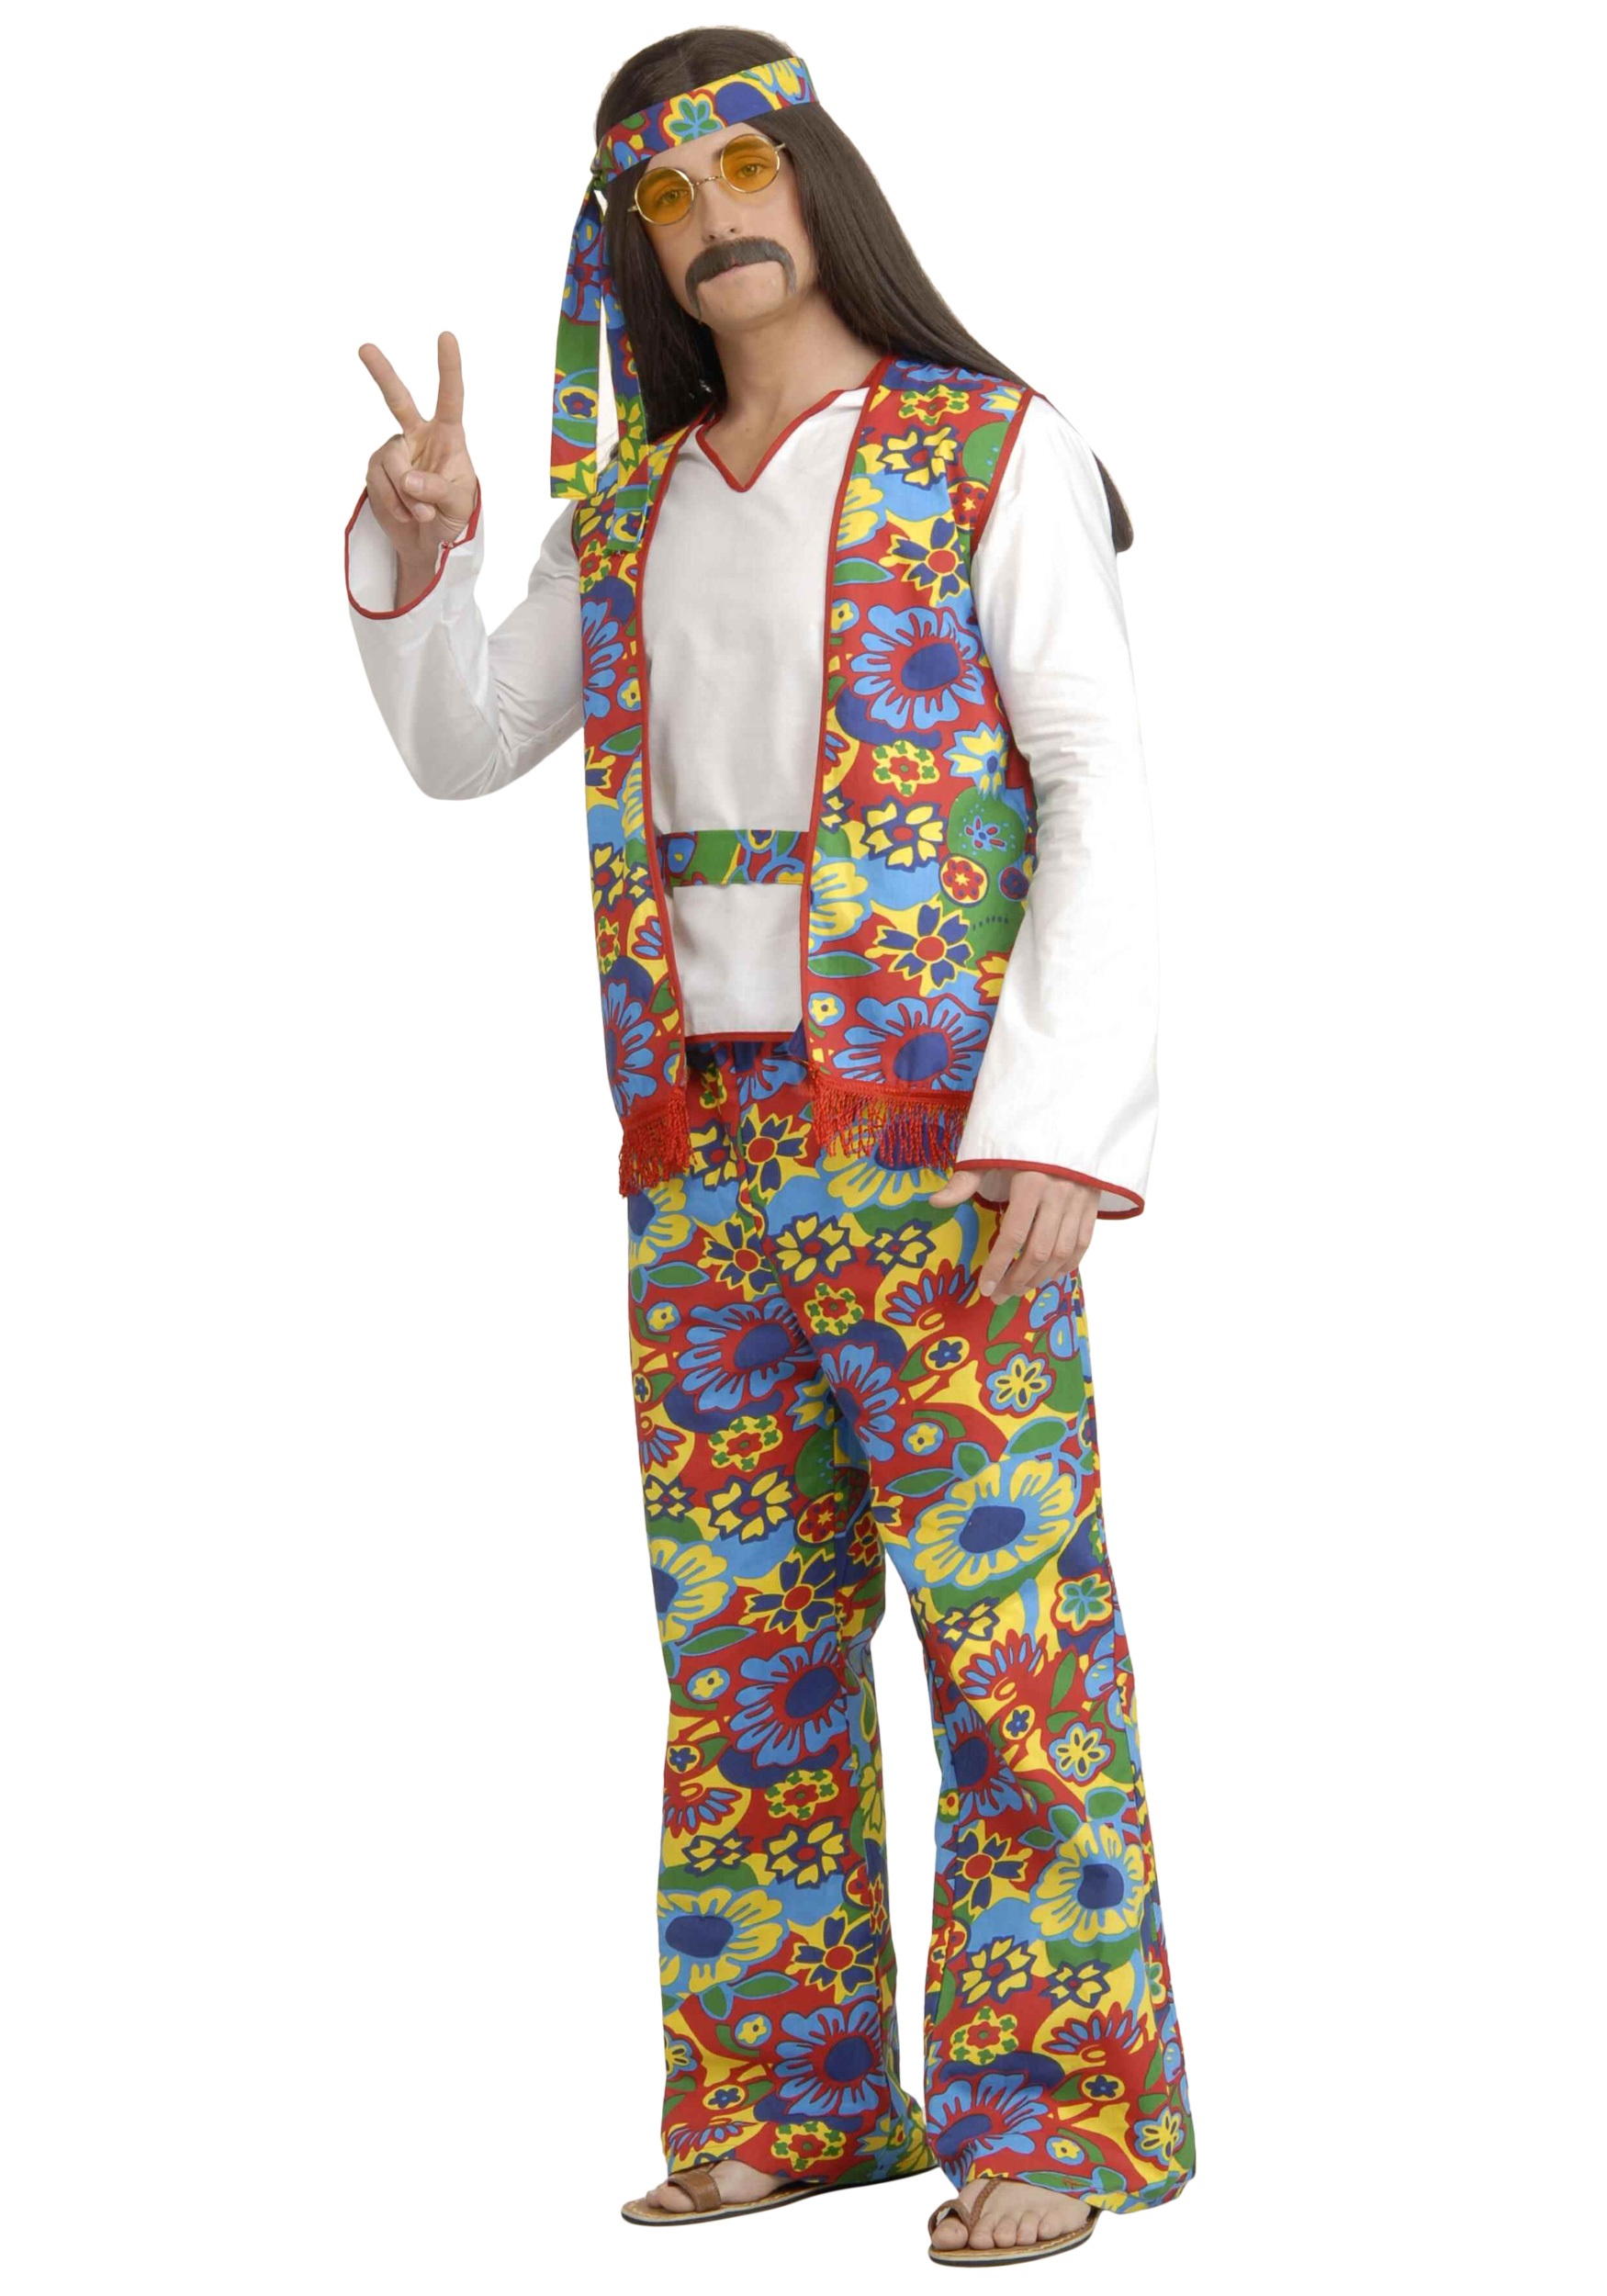 ... Hippie Costume! This bright costume will make you one groovy guy